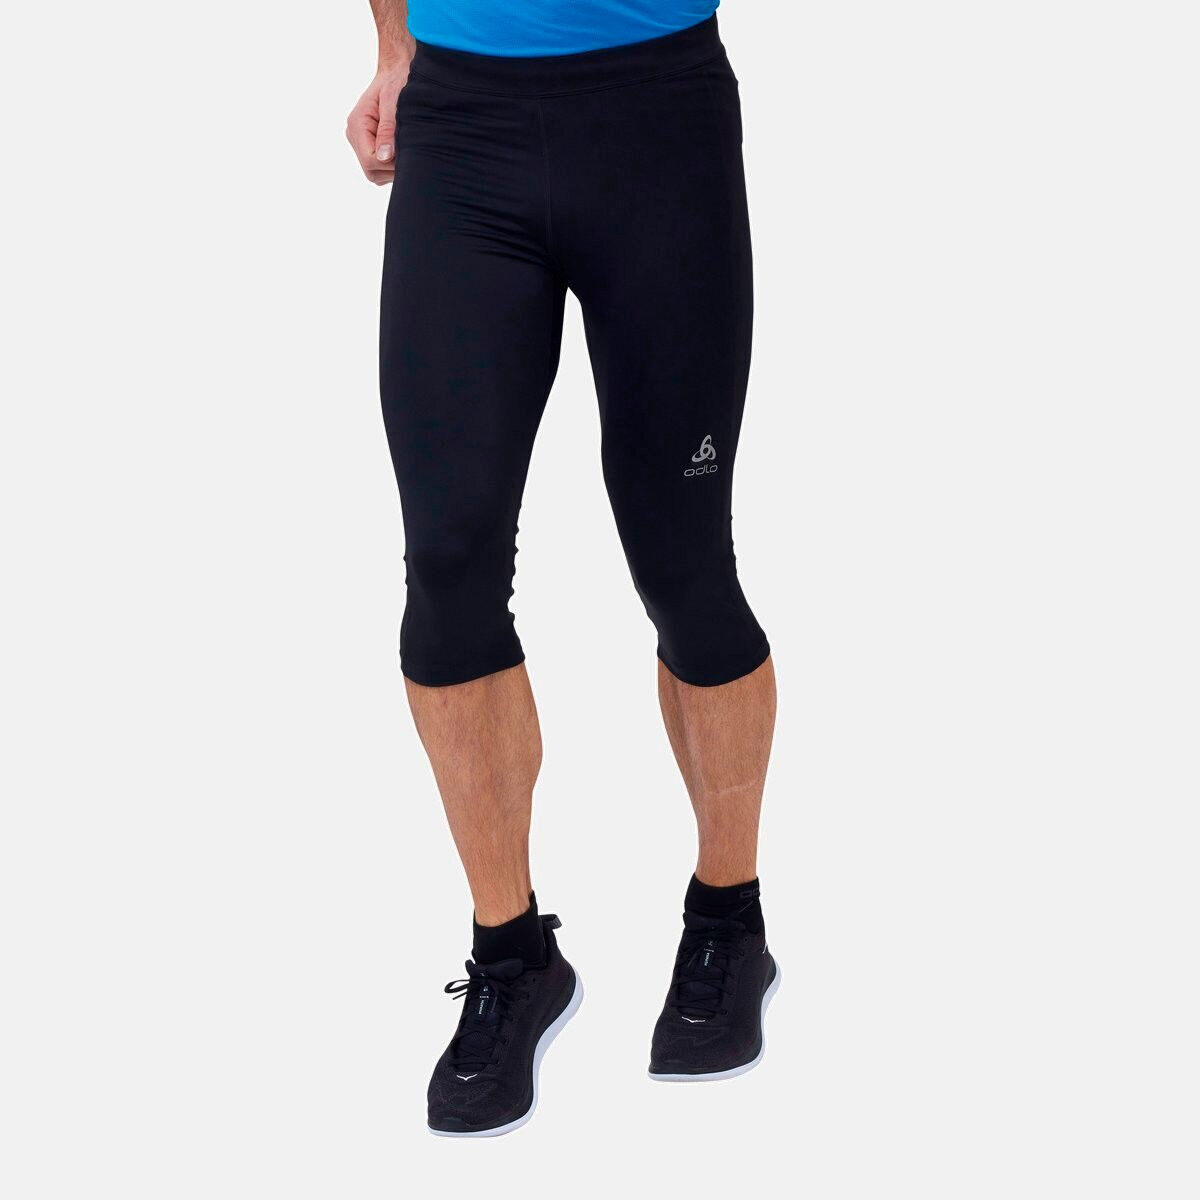 Wintertrail Mens Stretchy & Breathable Running Tights Black